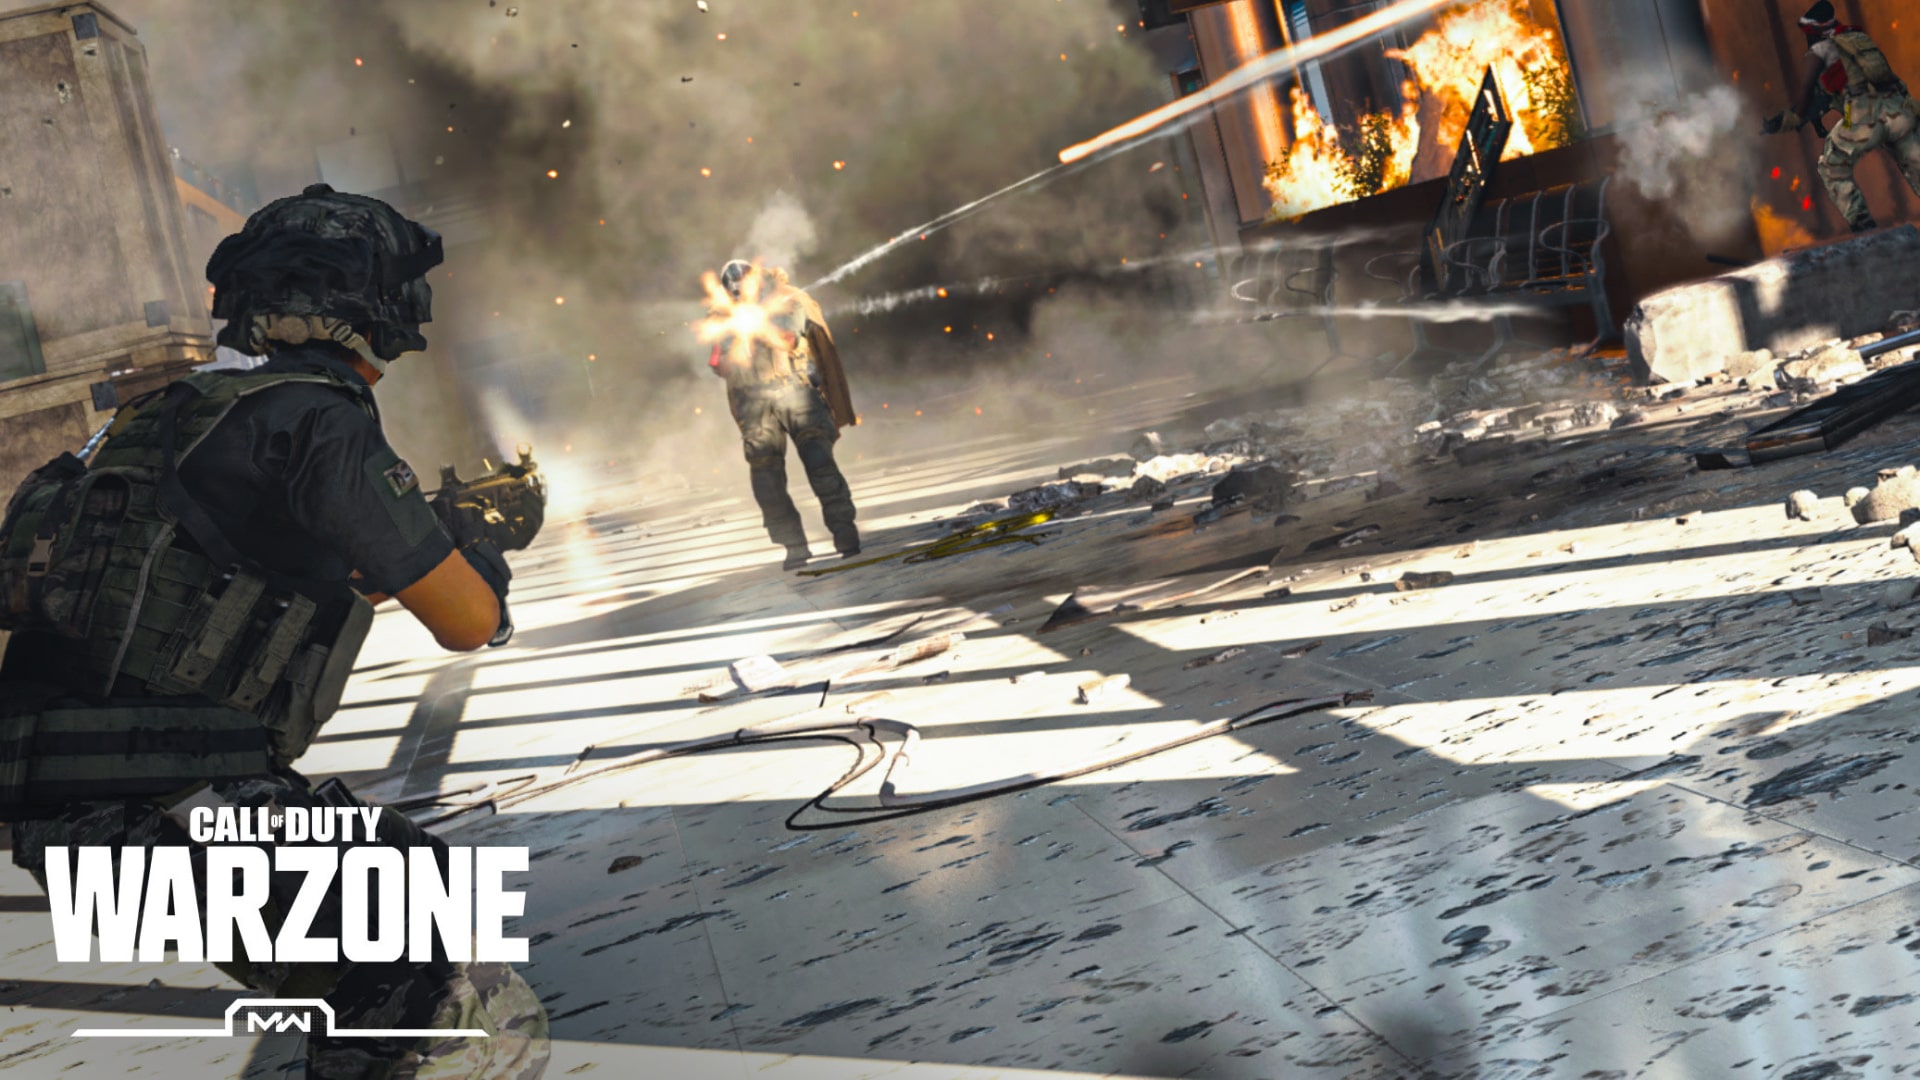 Call of Duty: Warzone is a Free To Play, 100+GB Battle Royale Game